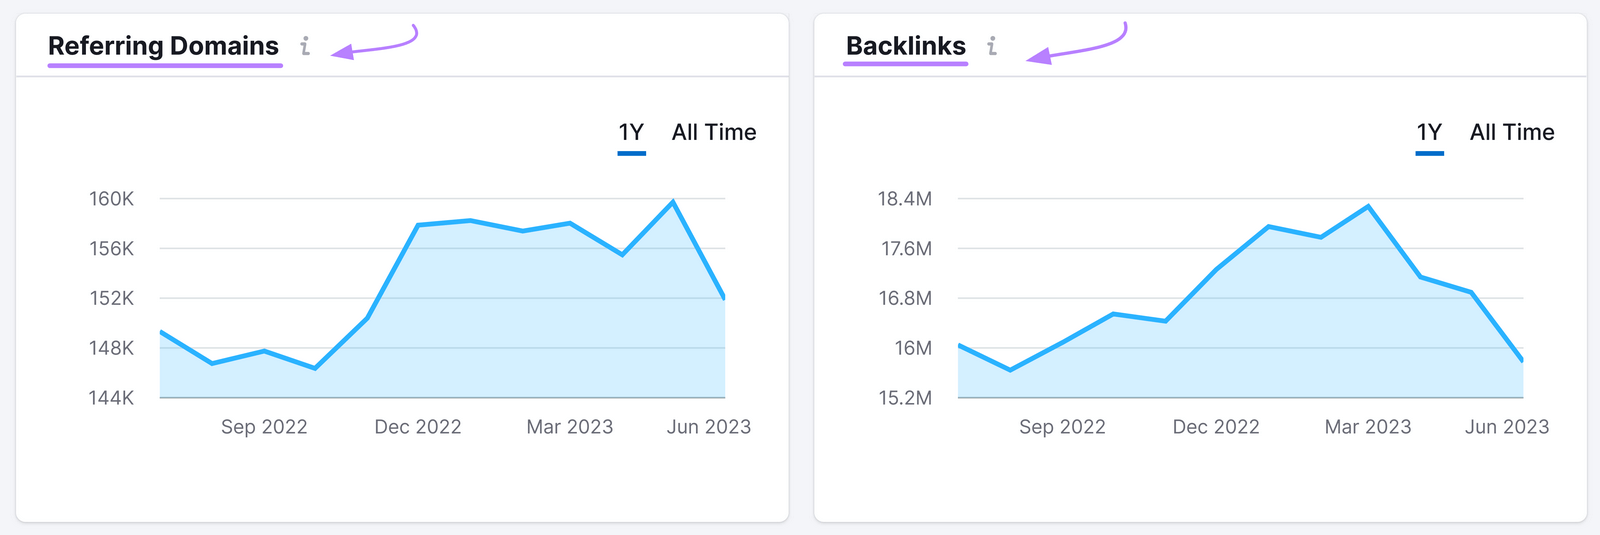 "referring domains" and "backlinks" metrics shown successful  graph